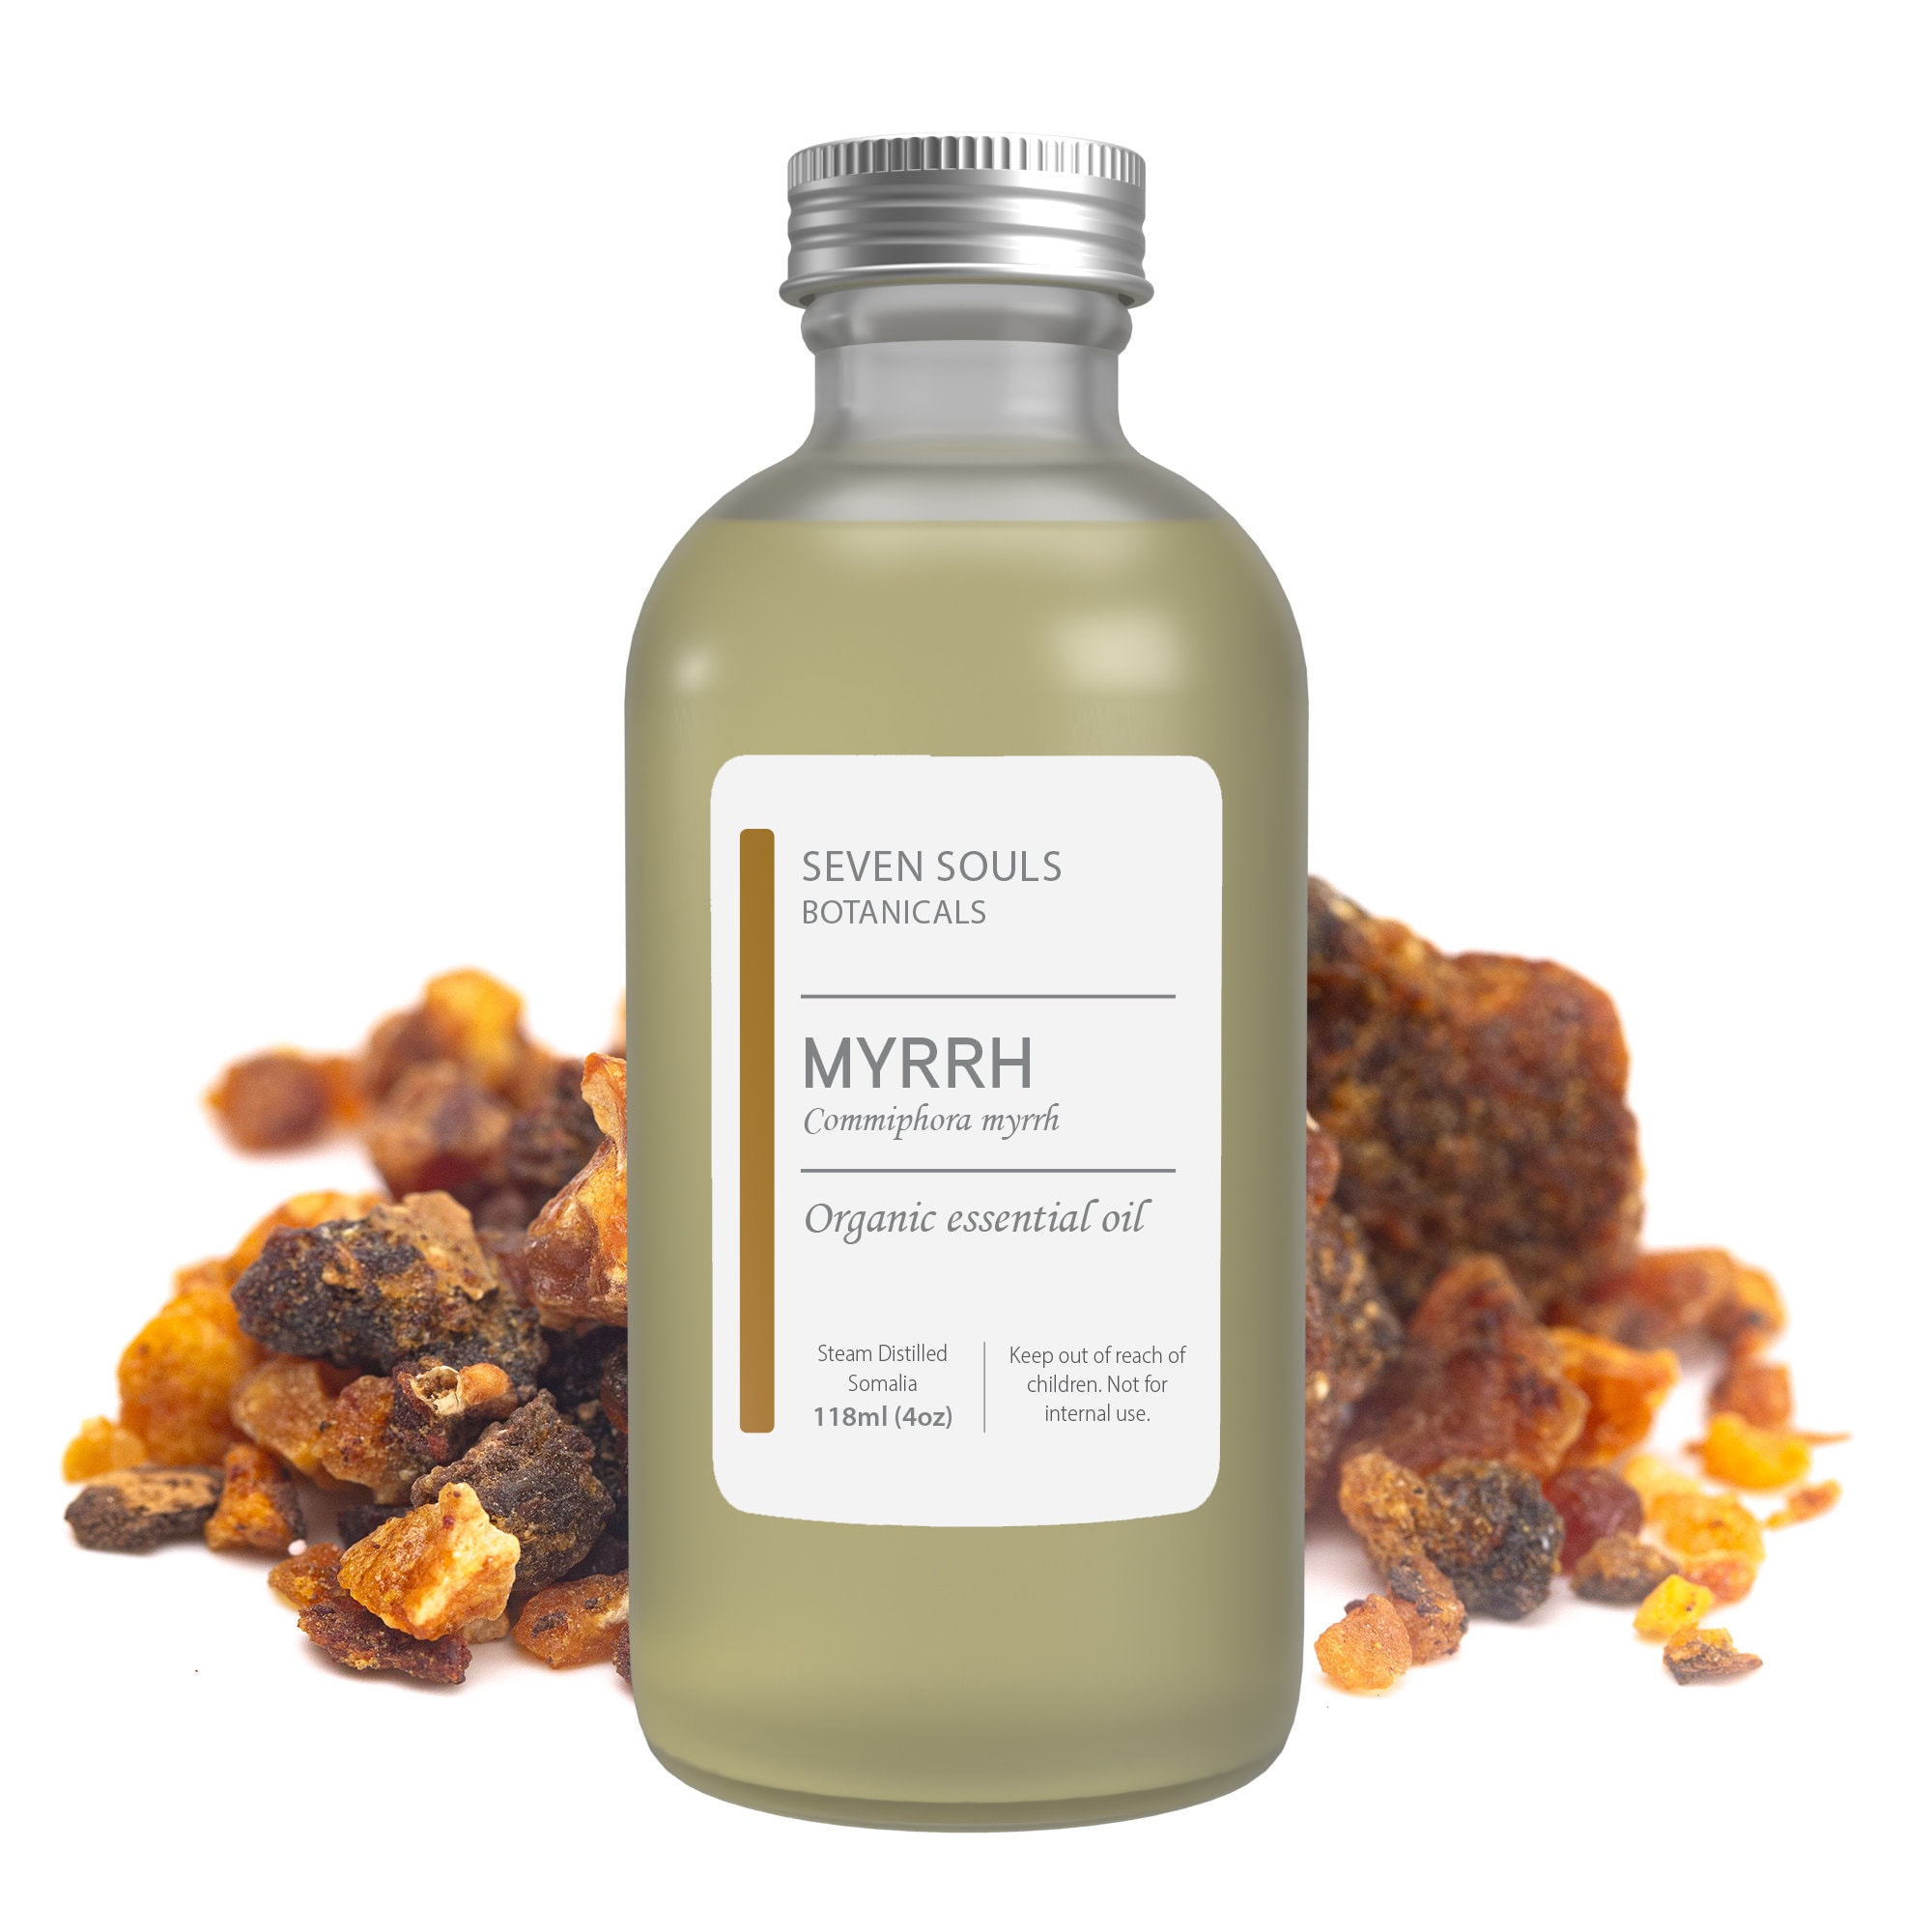 9 things you didn't know about Myrrh essential oil